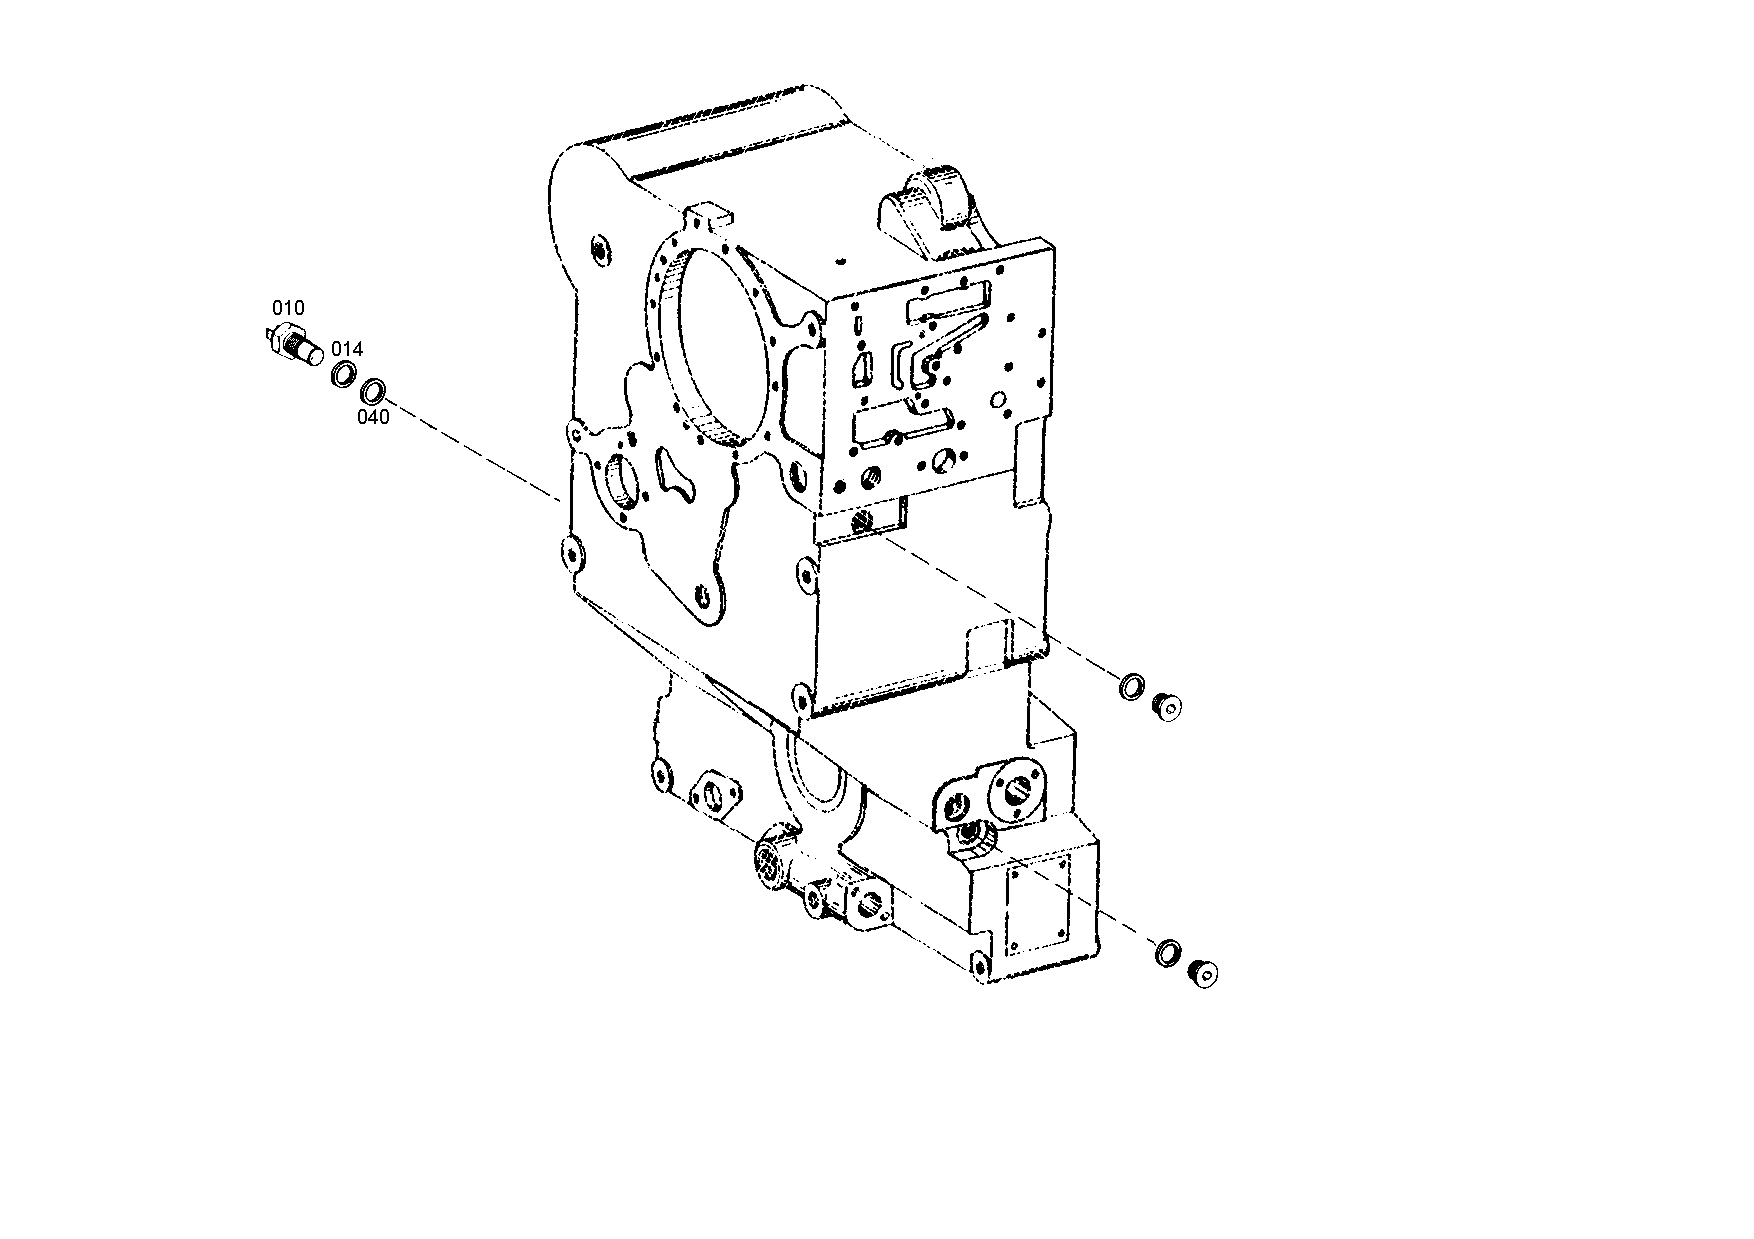 drawing for NOELL GMBH 0051591862 - INDUCTIVE TRANSMITTER (figure 1)